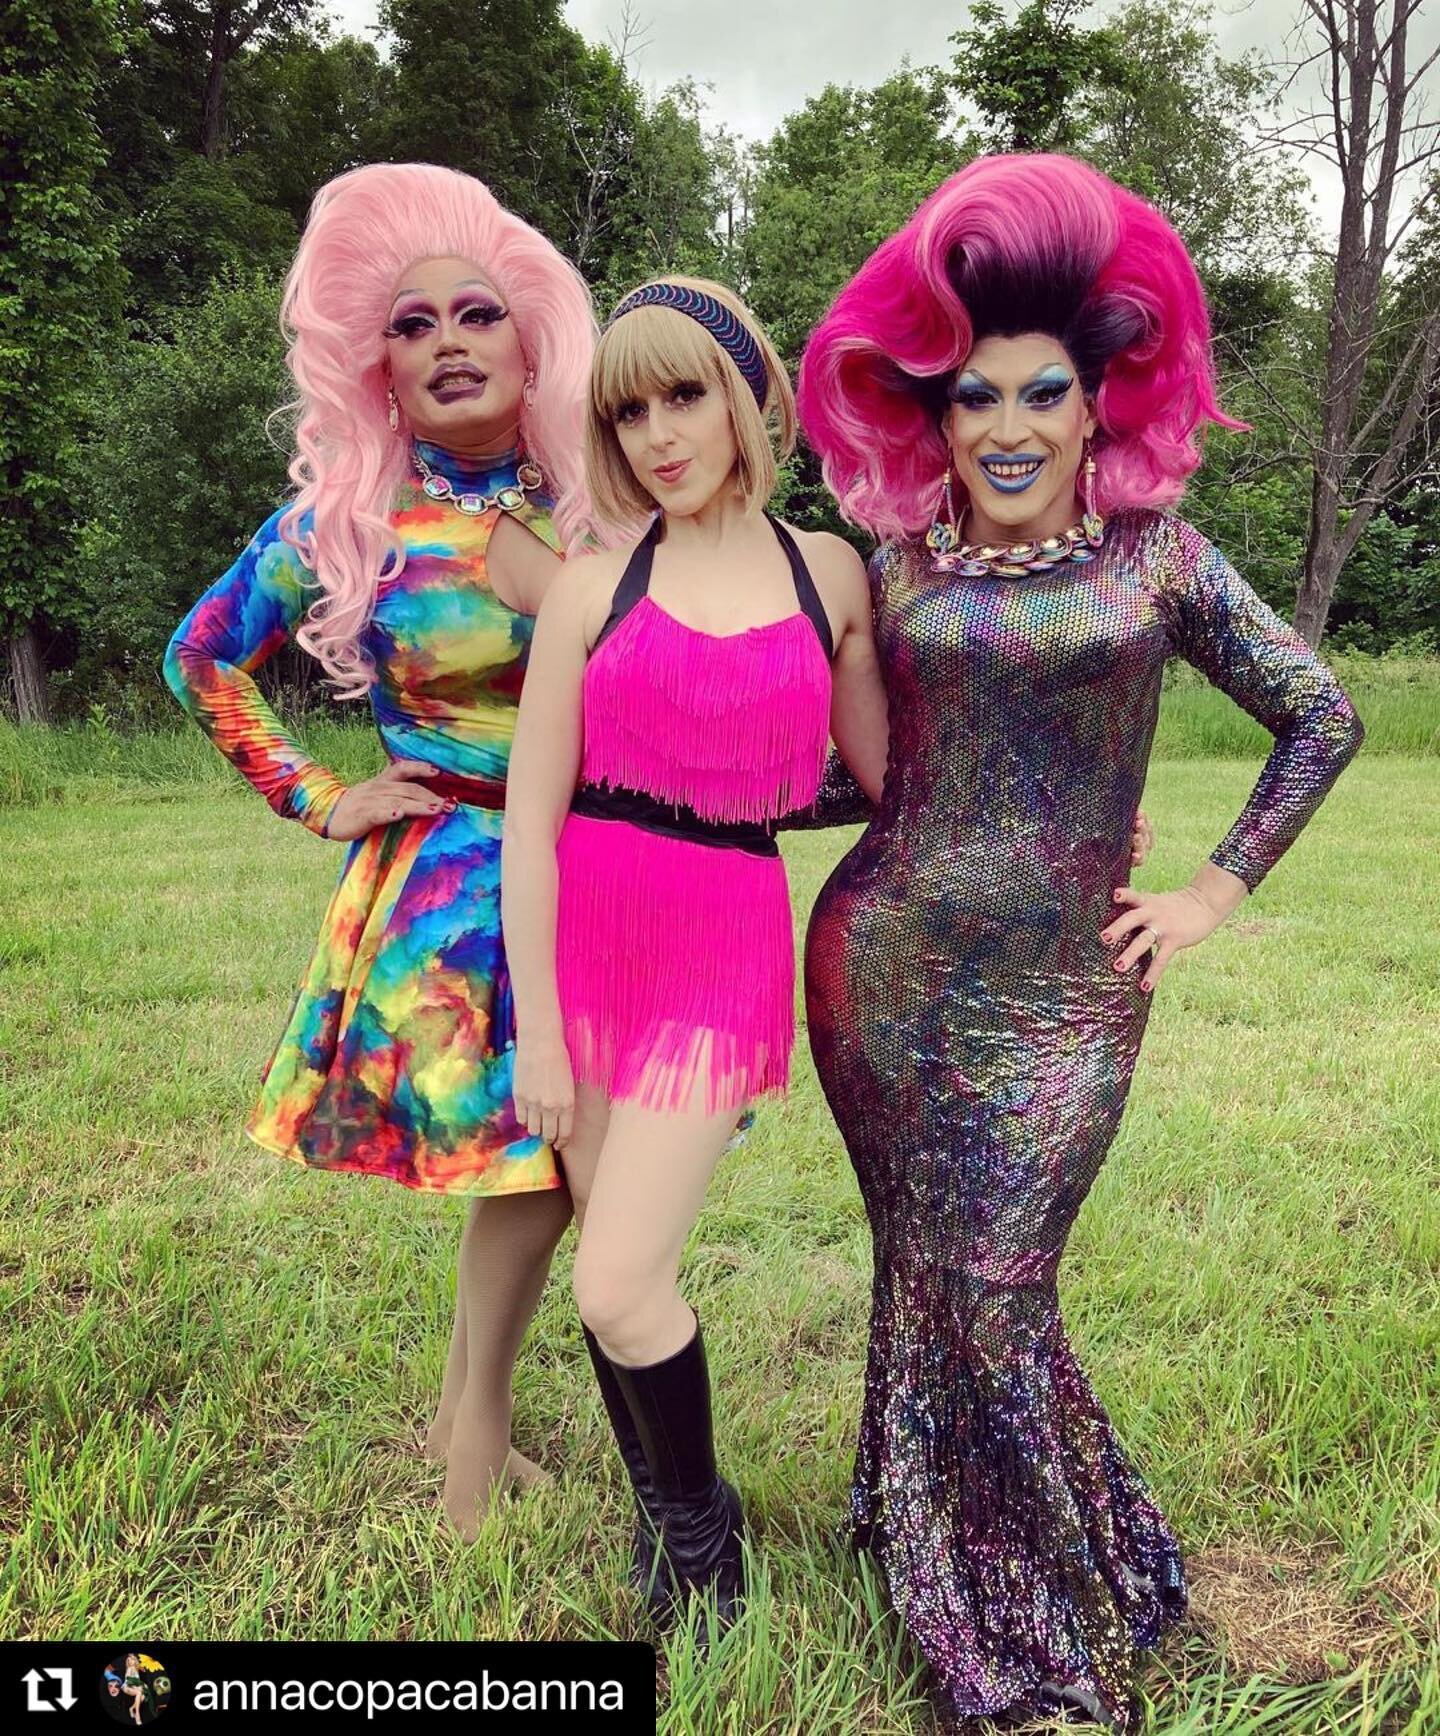 #Repost @annacopacabanna with @make_repost
・・・
Did I mention I had a blast performing at Pride @oldrockville and meeting the most fabulous @_angel_elektra_ and @shay_d_pines !! Pink Ladies forever xxxx #pridemonth #pinkladies #hairstories #dragqueen 